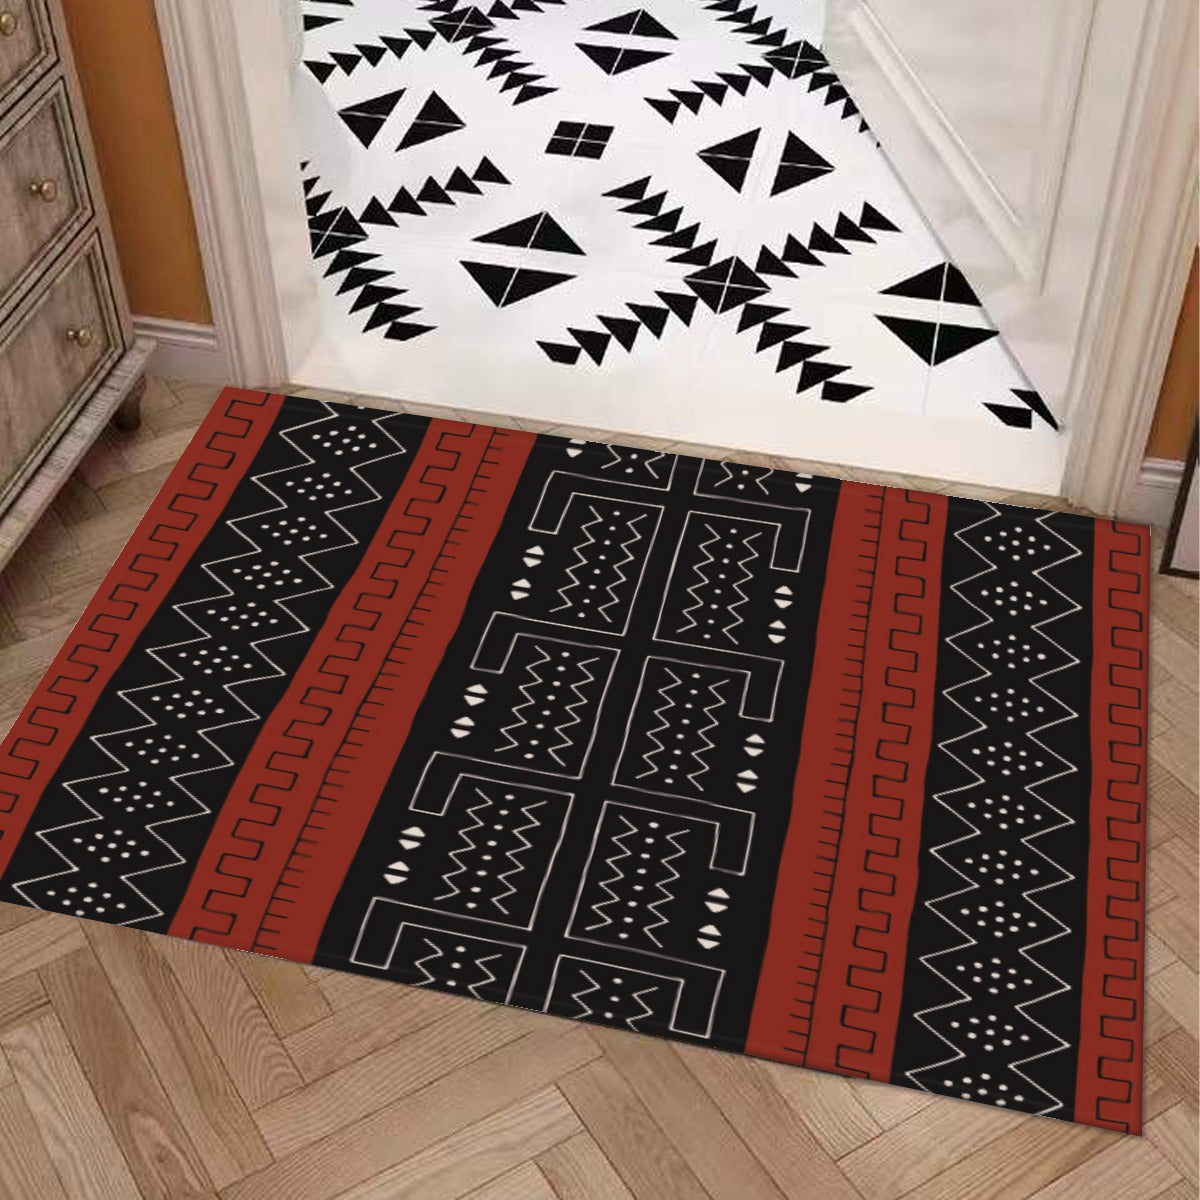 African Inspired Patterns Bath Mat - Bynelo